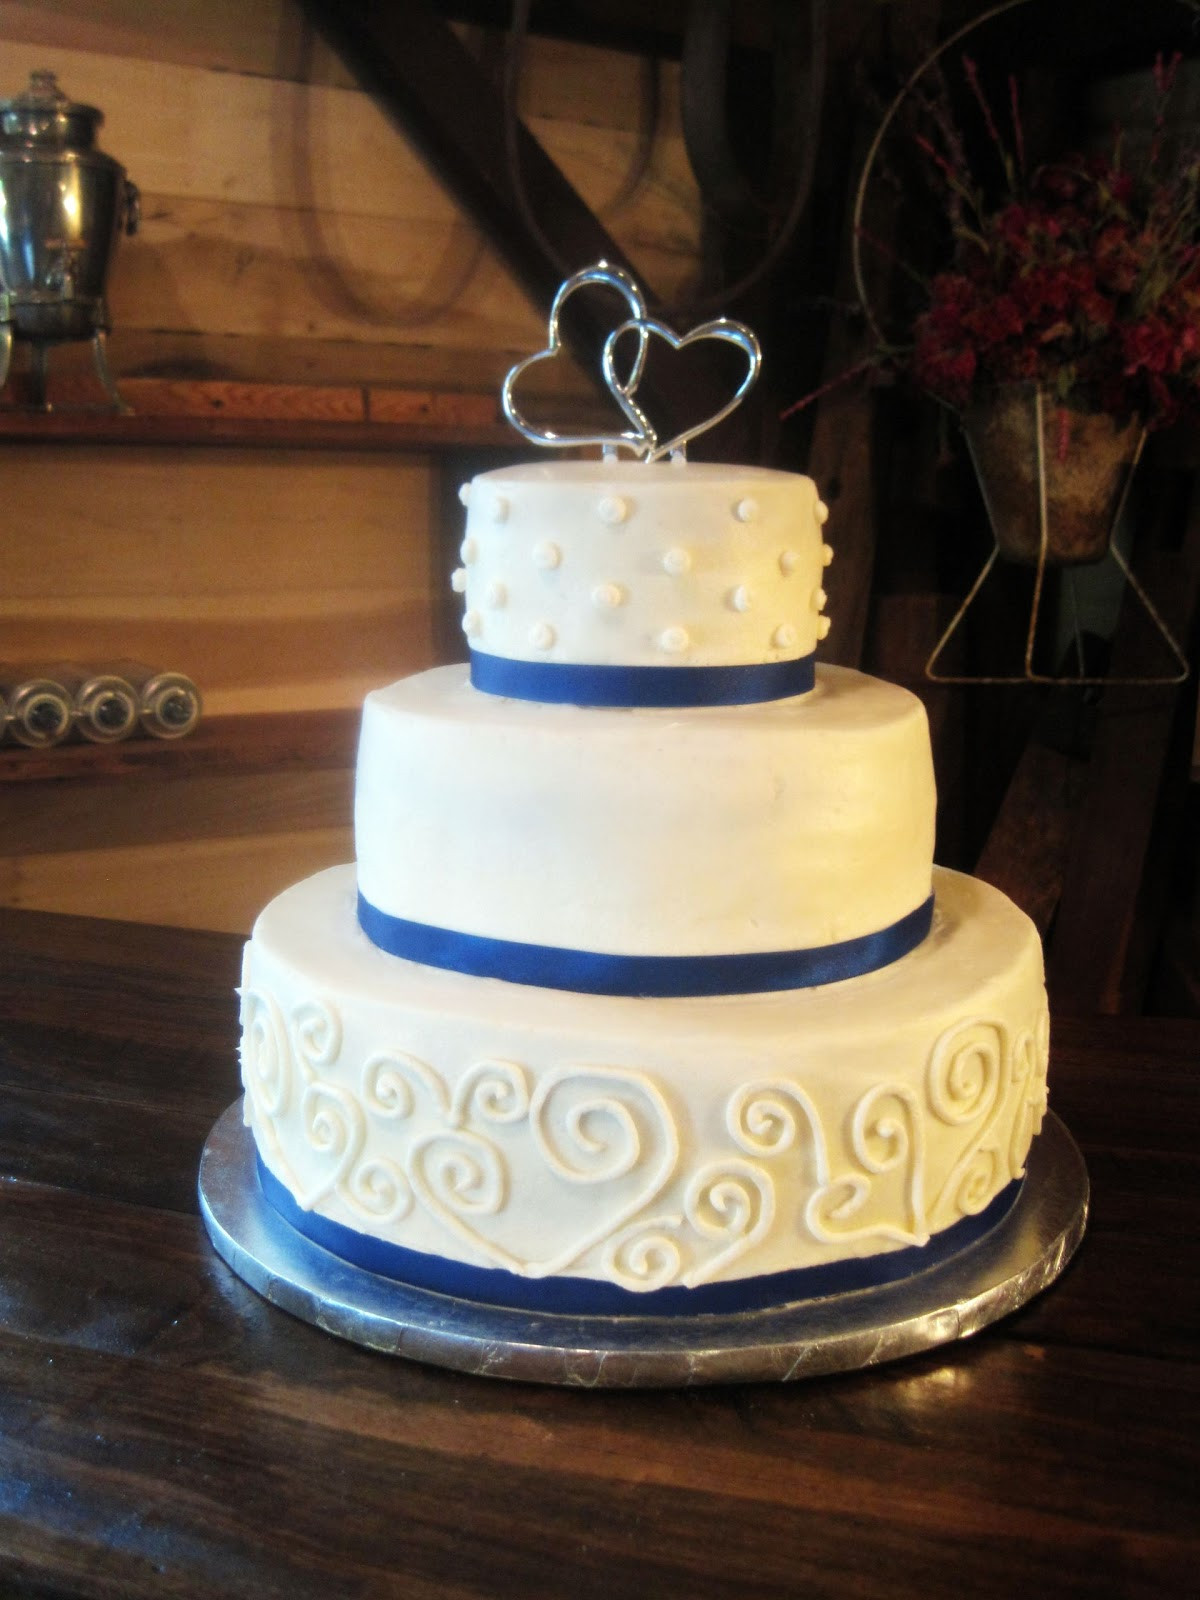 Wedding Cakes Country
 Have a Piece of Cake A Beautiful Country Wedding Cake